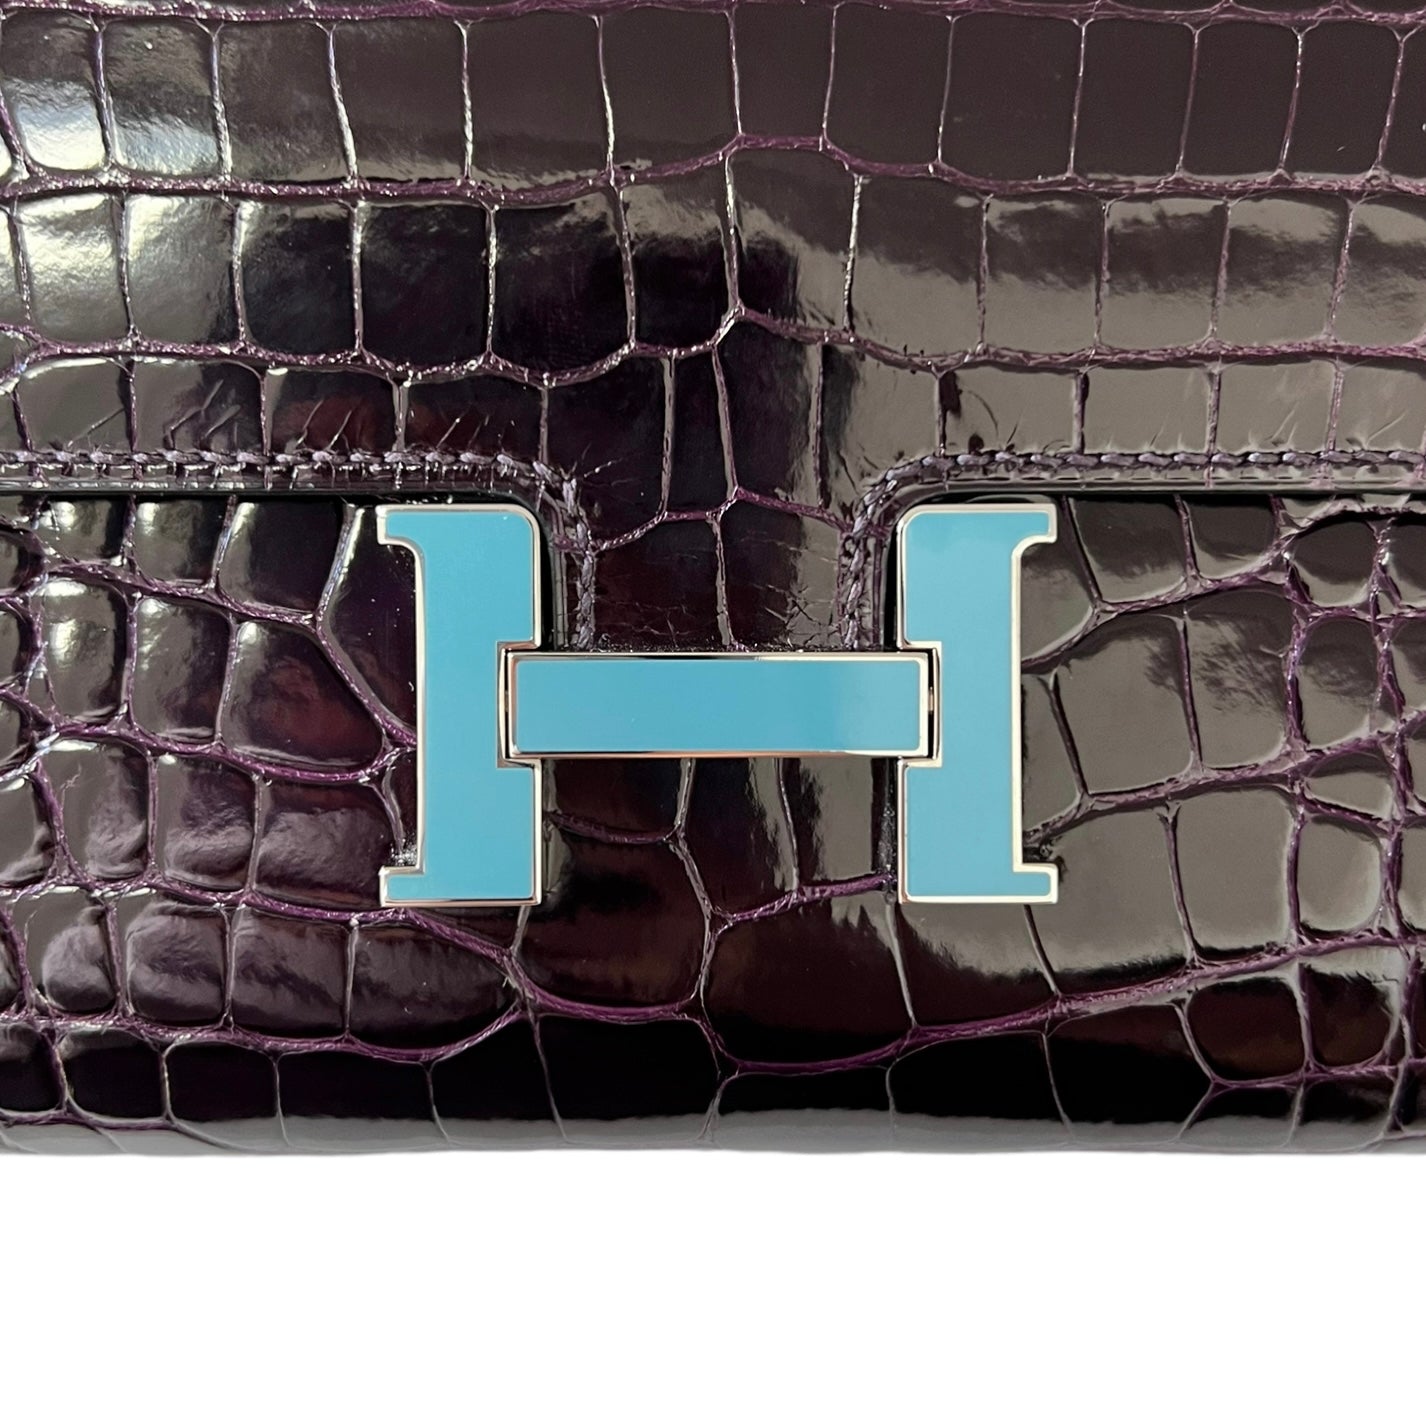 Hermès Rare Constance Clutch “Long Wallet” Brown Alligator Leather As New with Box and Dust Bag